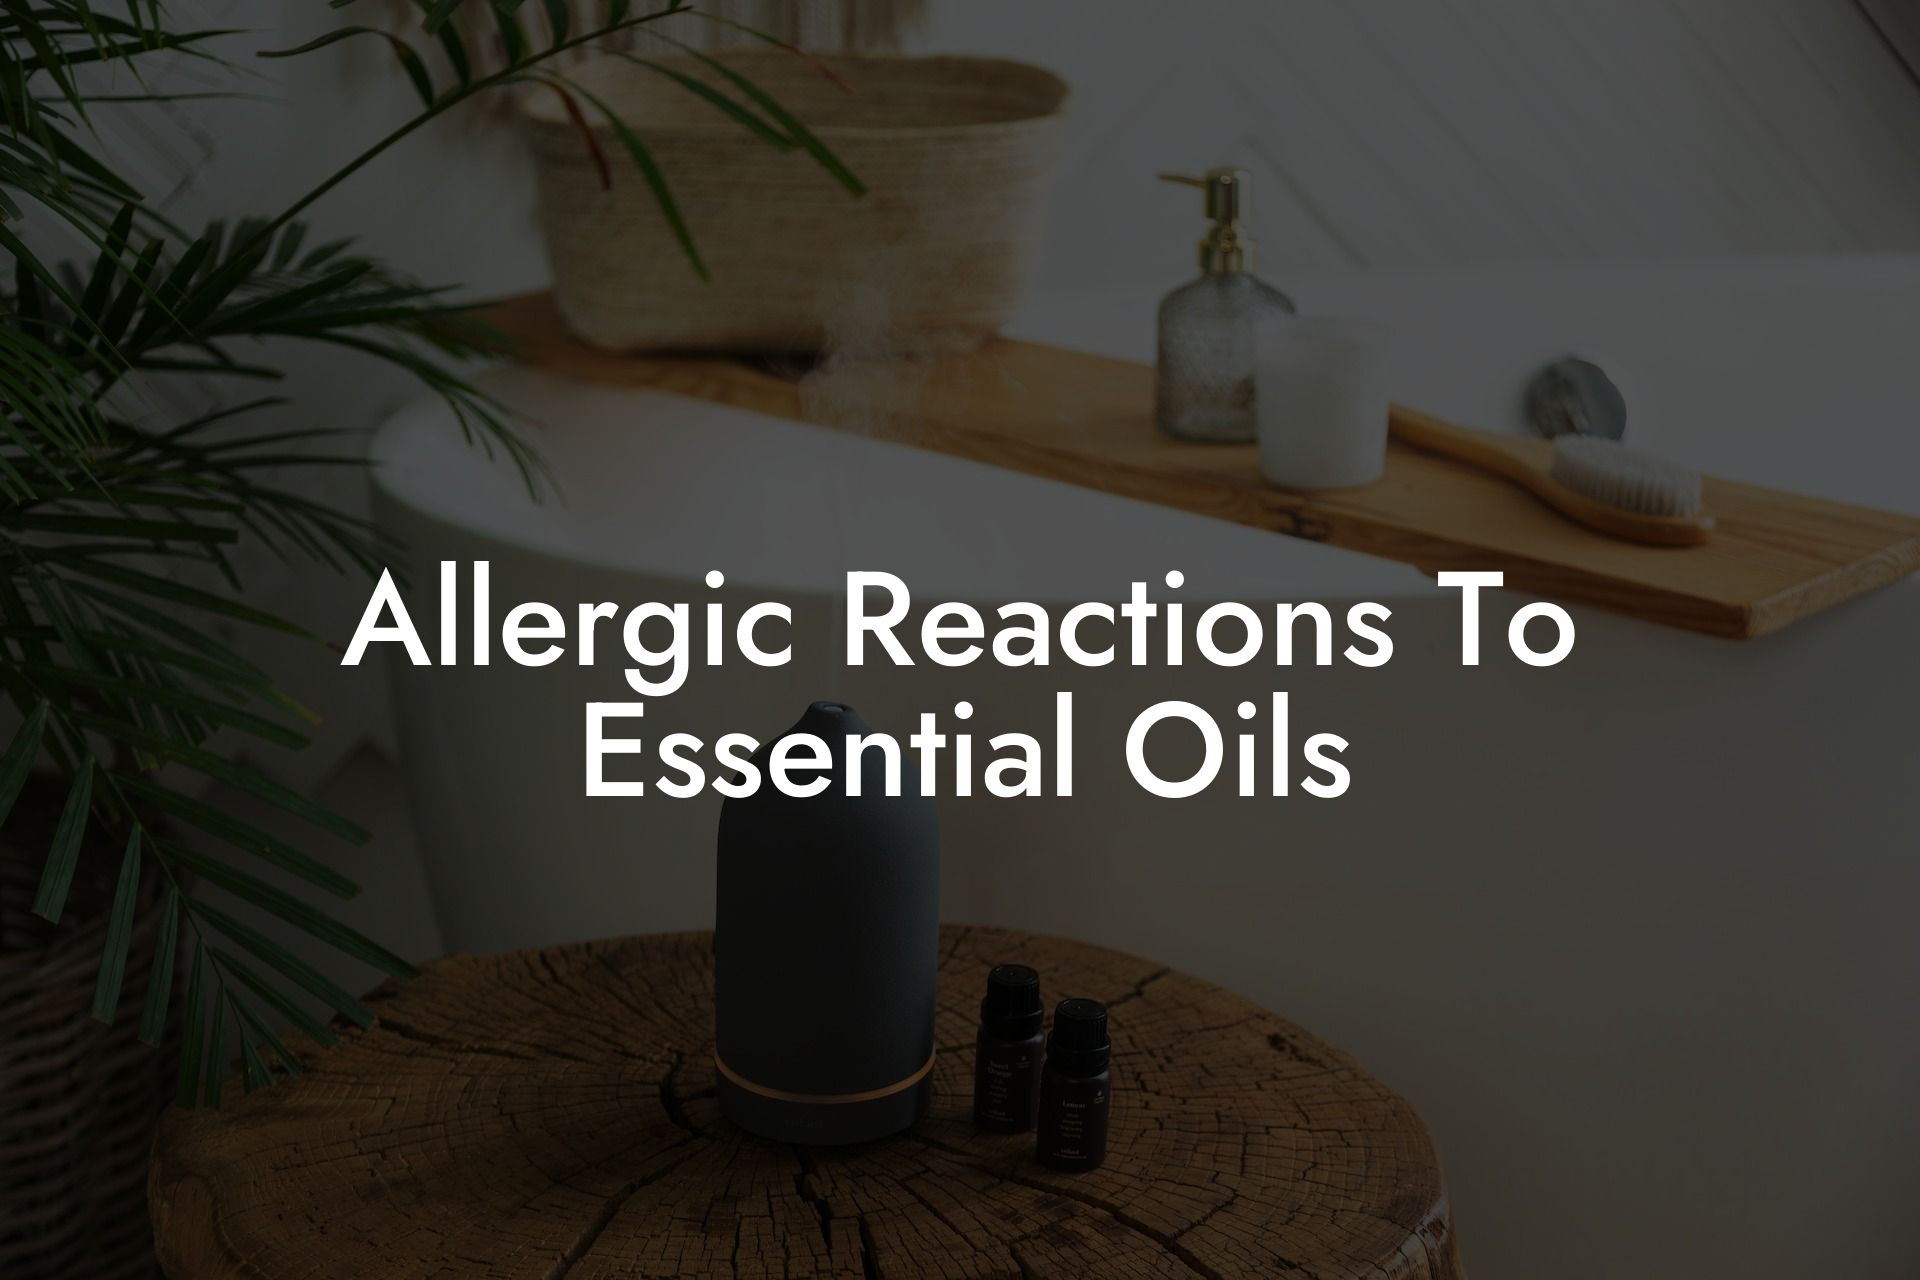 Allergic Reactions To Essential Oils